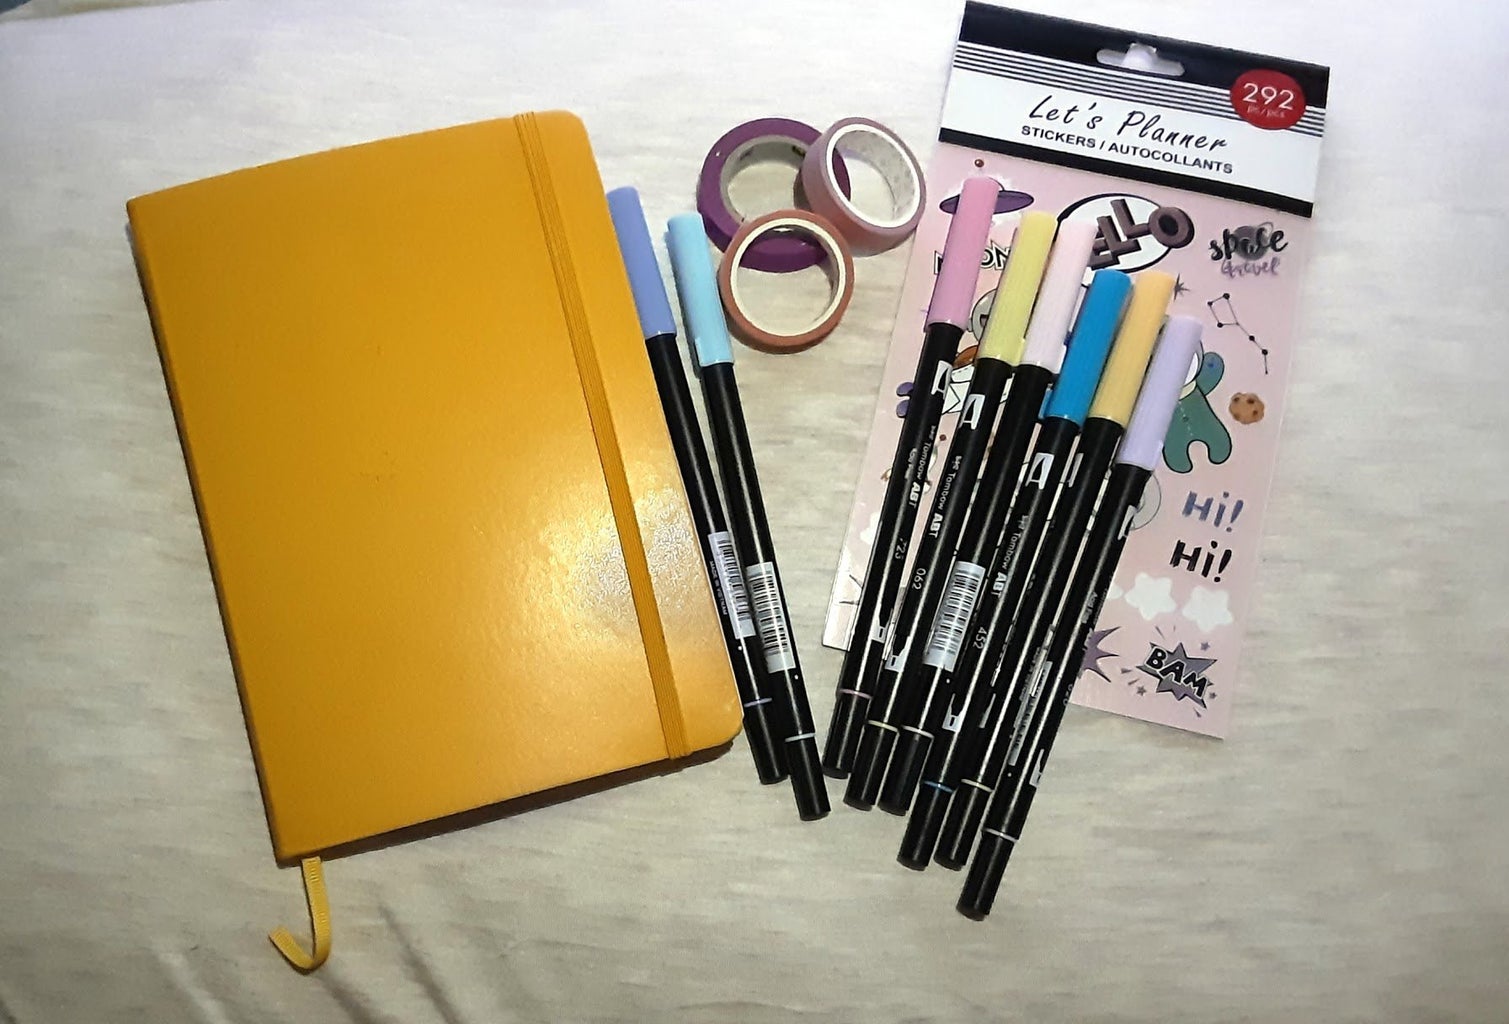 Supplies needed for bullet journal planning: bullet journal, dual brush pens, and washi tape.